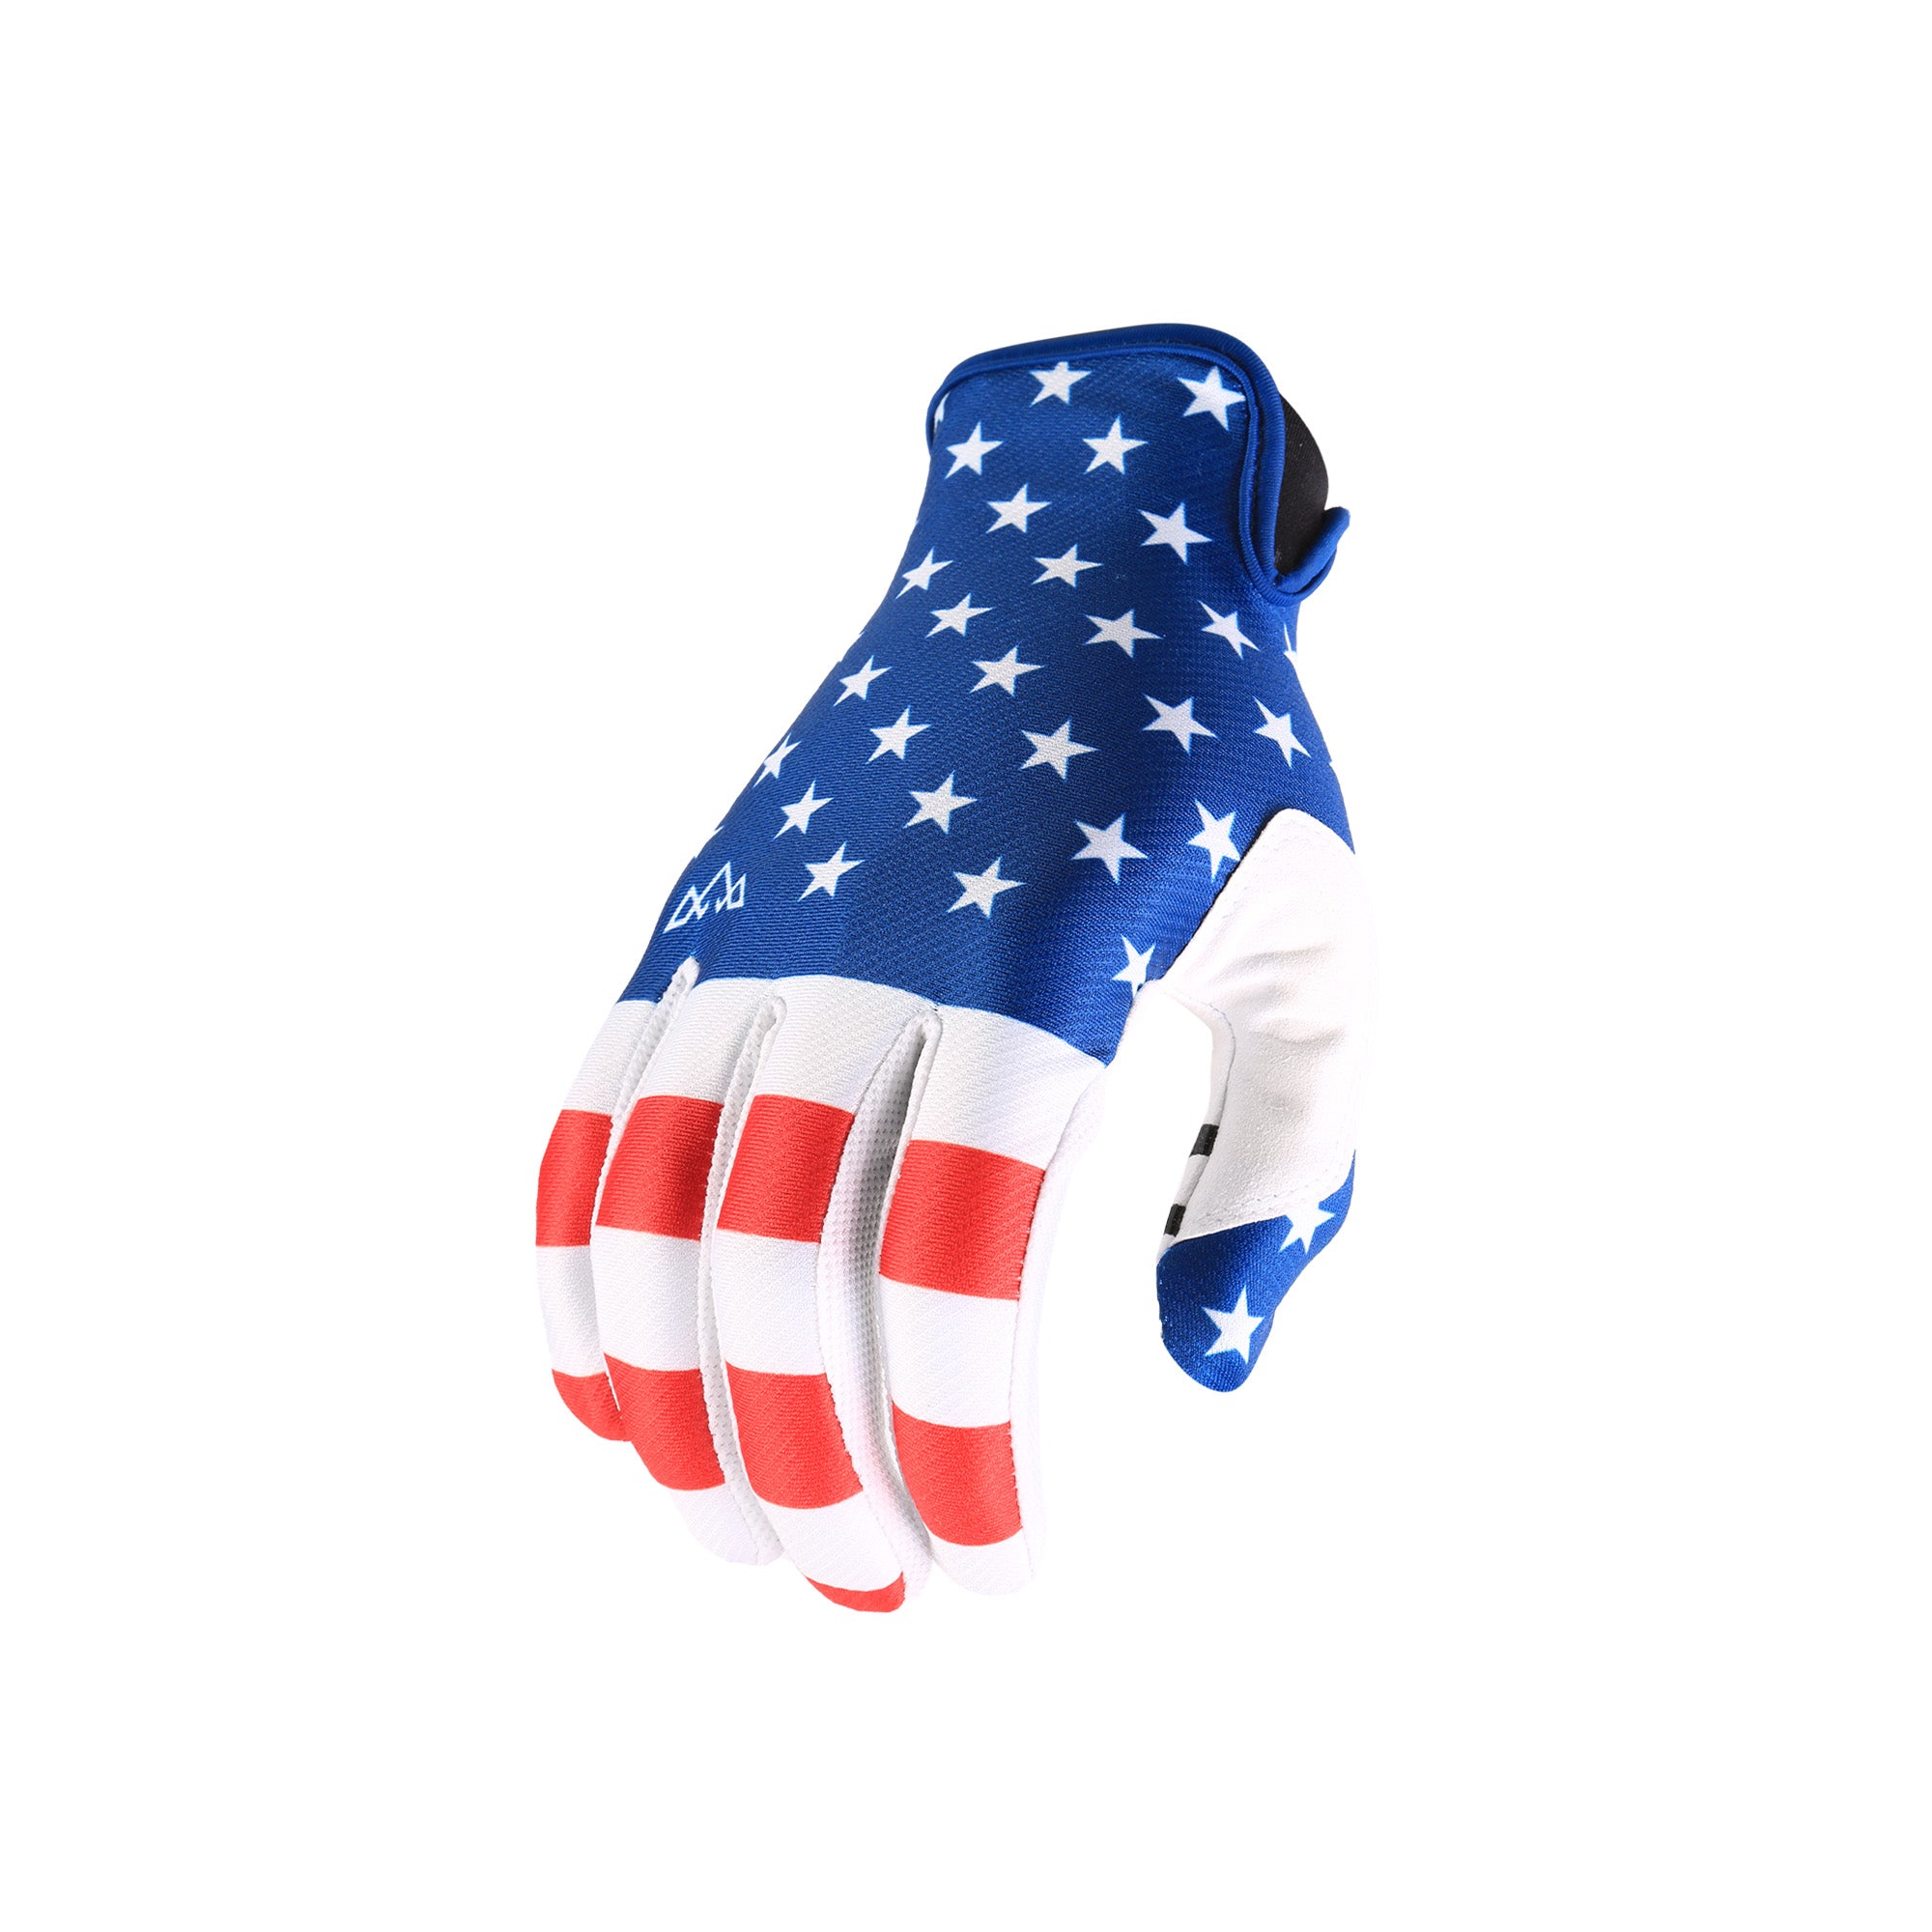 Ridgeline Gloves - Indivisible 3.0 (Limited Release)